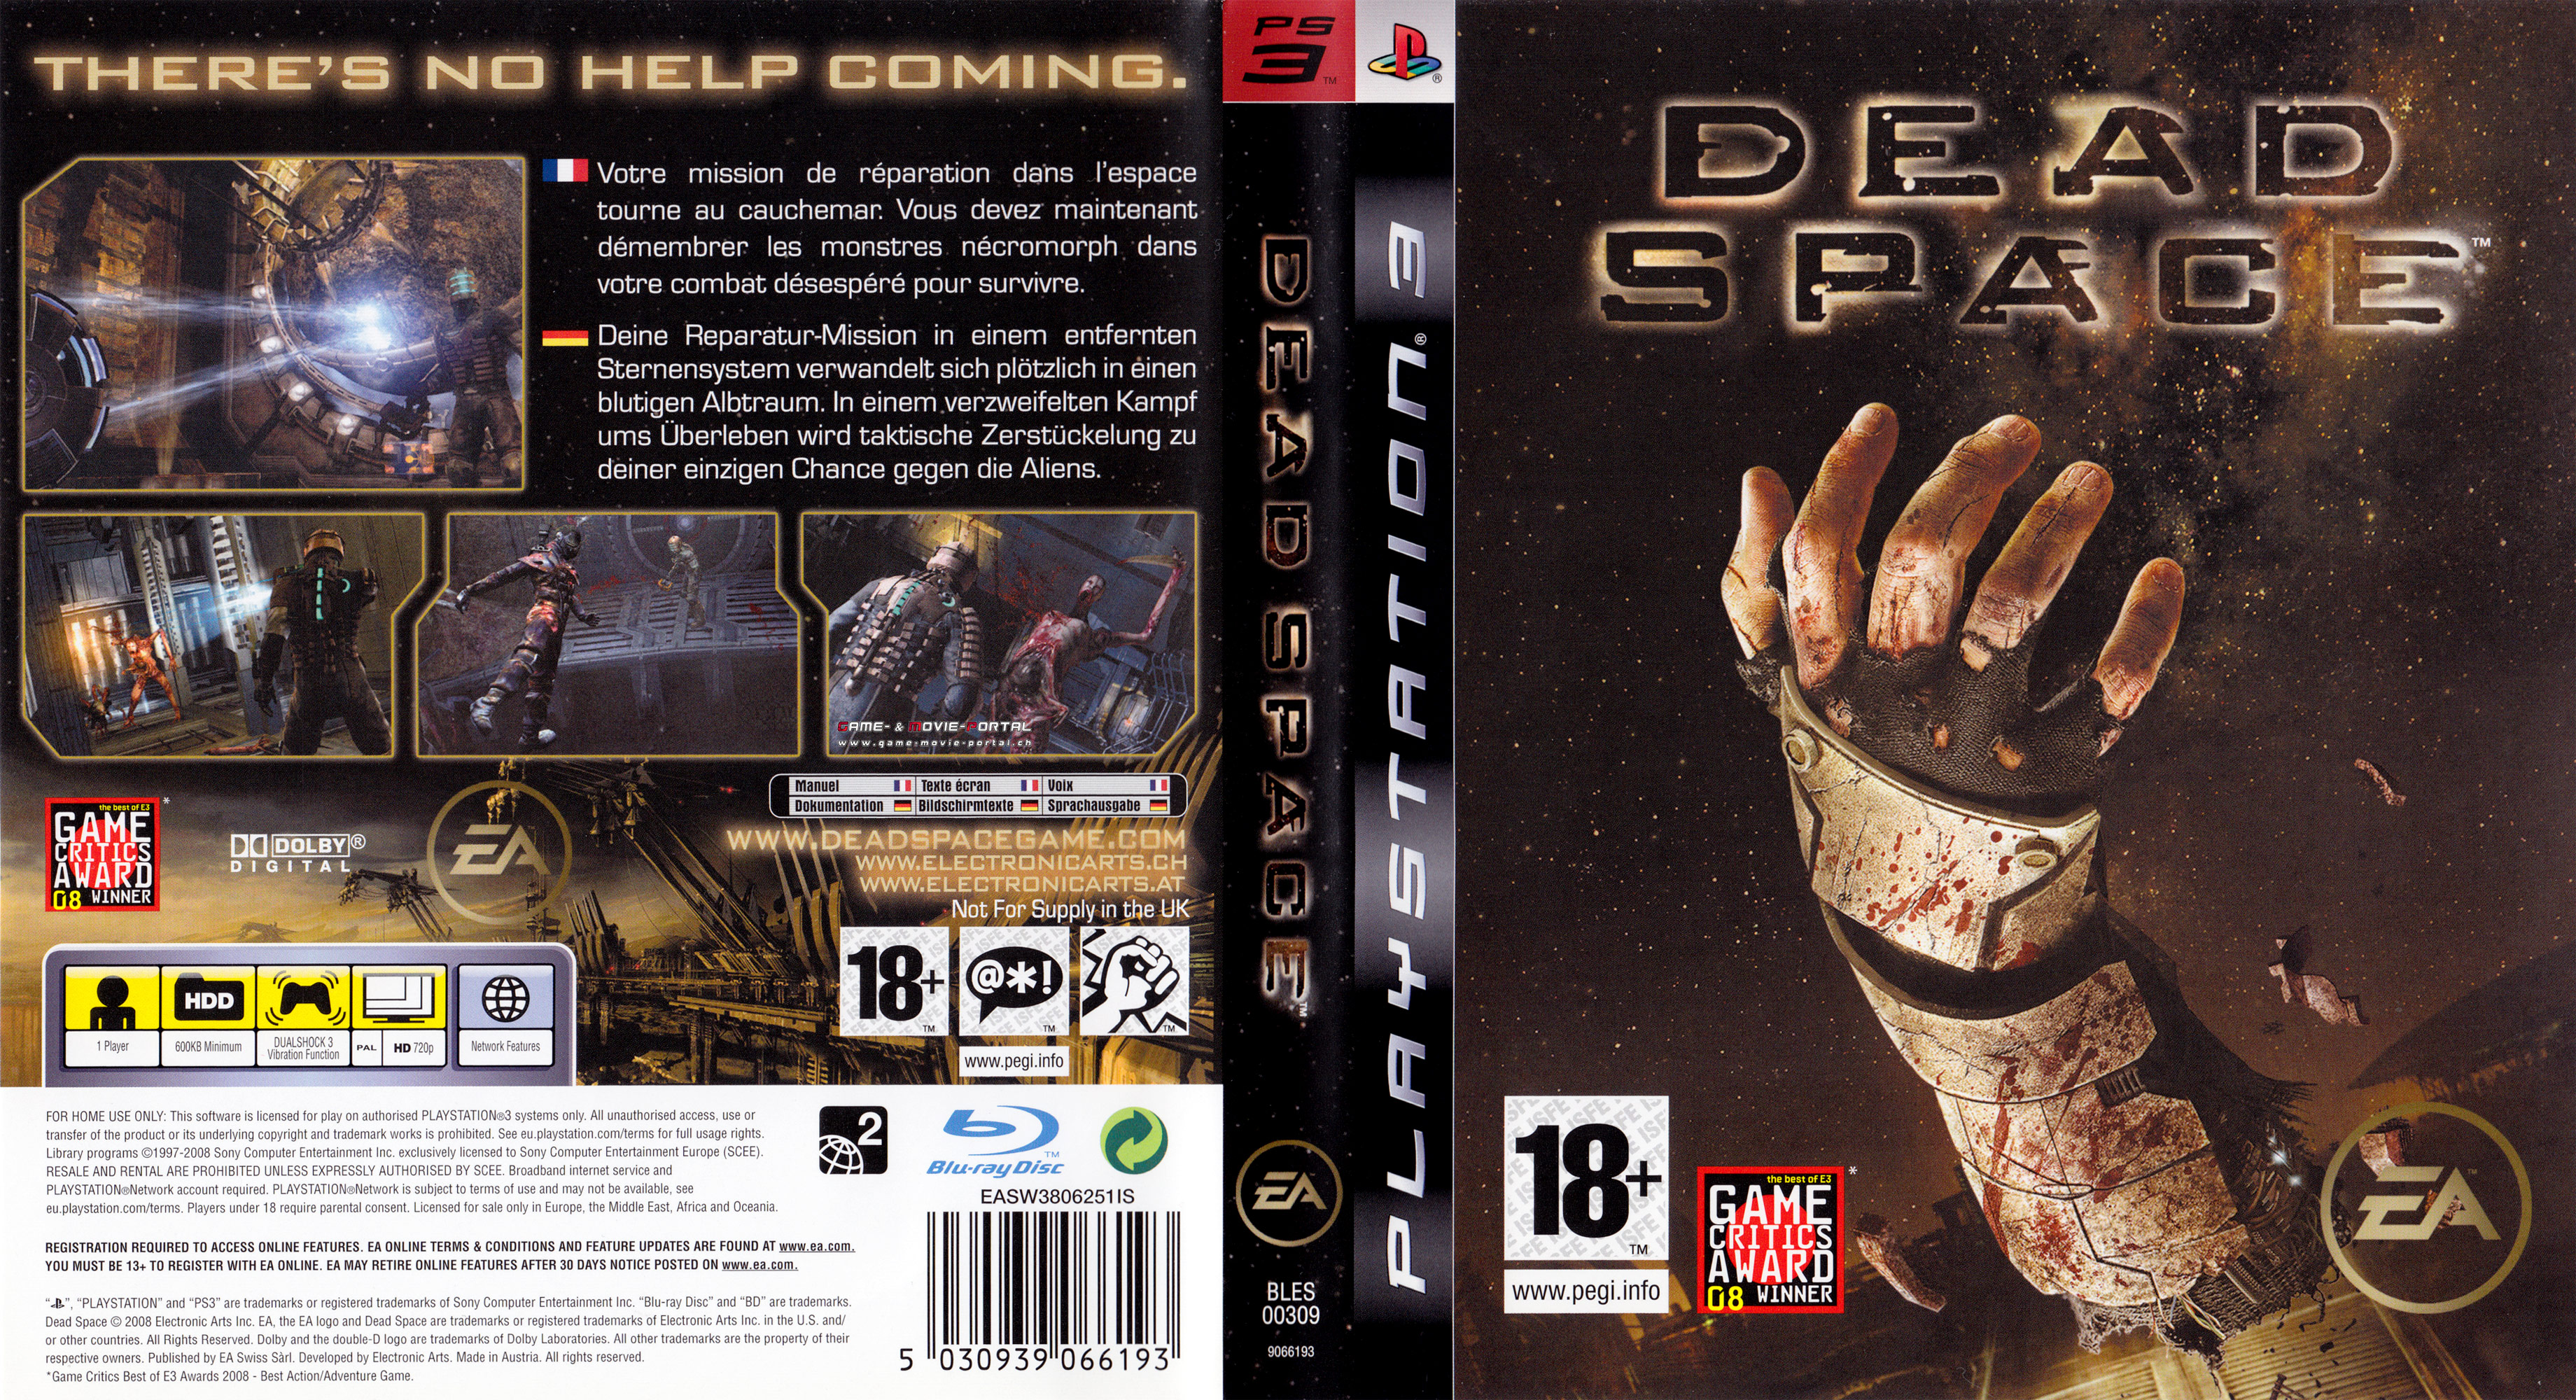 Dead Space Playstation 3 Covers Cover Century Over 500 000 Album Art Covers For Free